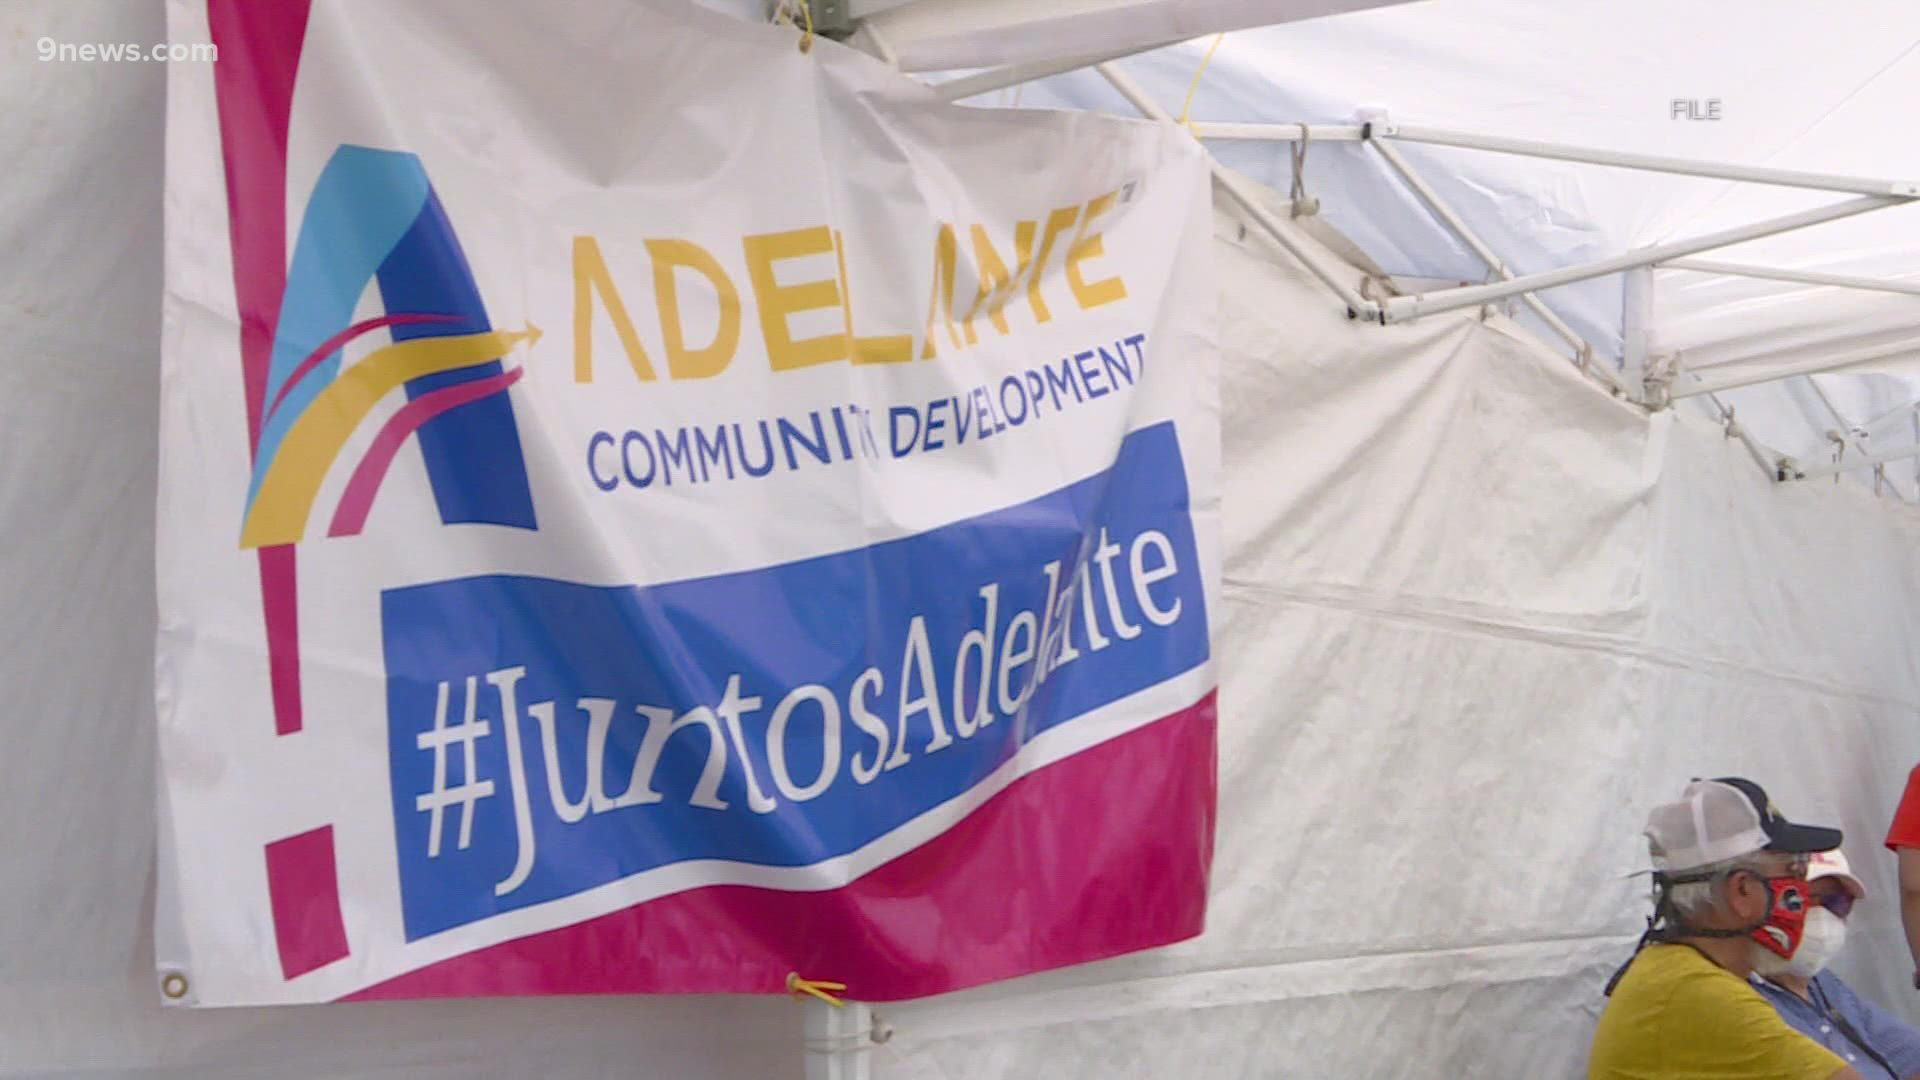 After a vaccine clinic was cancelled due to staffing shortages, Adelante Community Development said it's important to know there's still a demand for the vaccine.